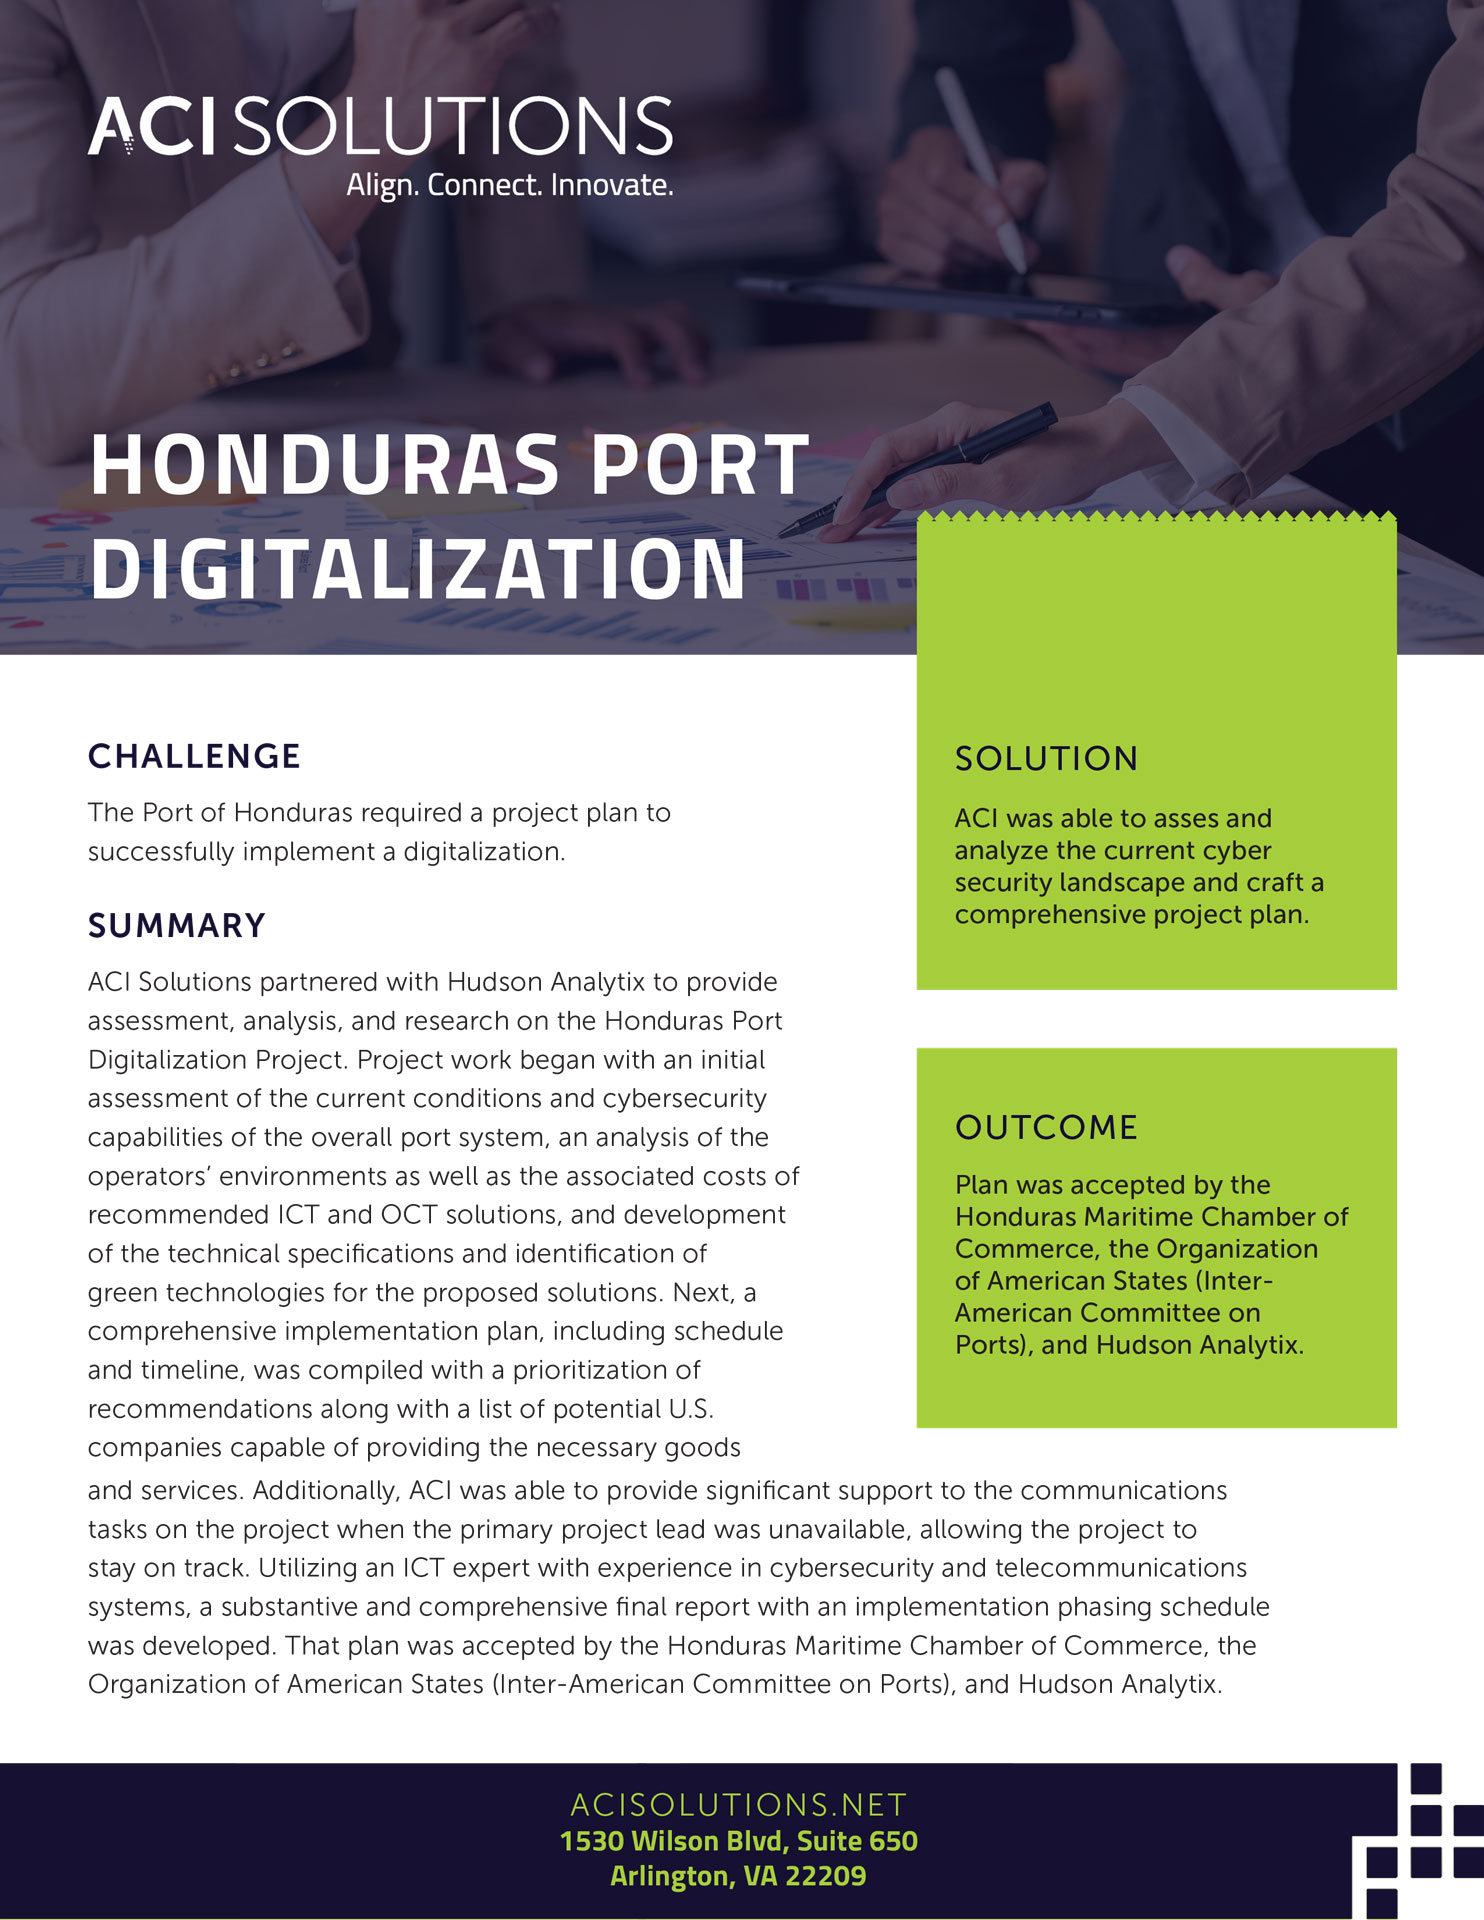 ACI Solutions partnered with Hudson Analytix to provide assessment, analysis, and research on the Honduras Port Digitalization Project(Click to download PDF)